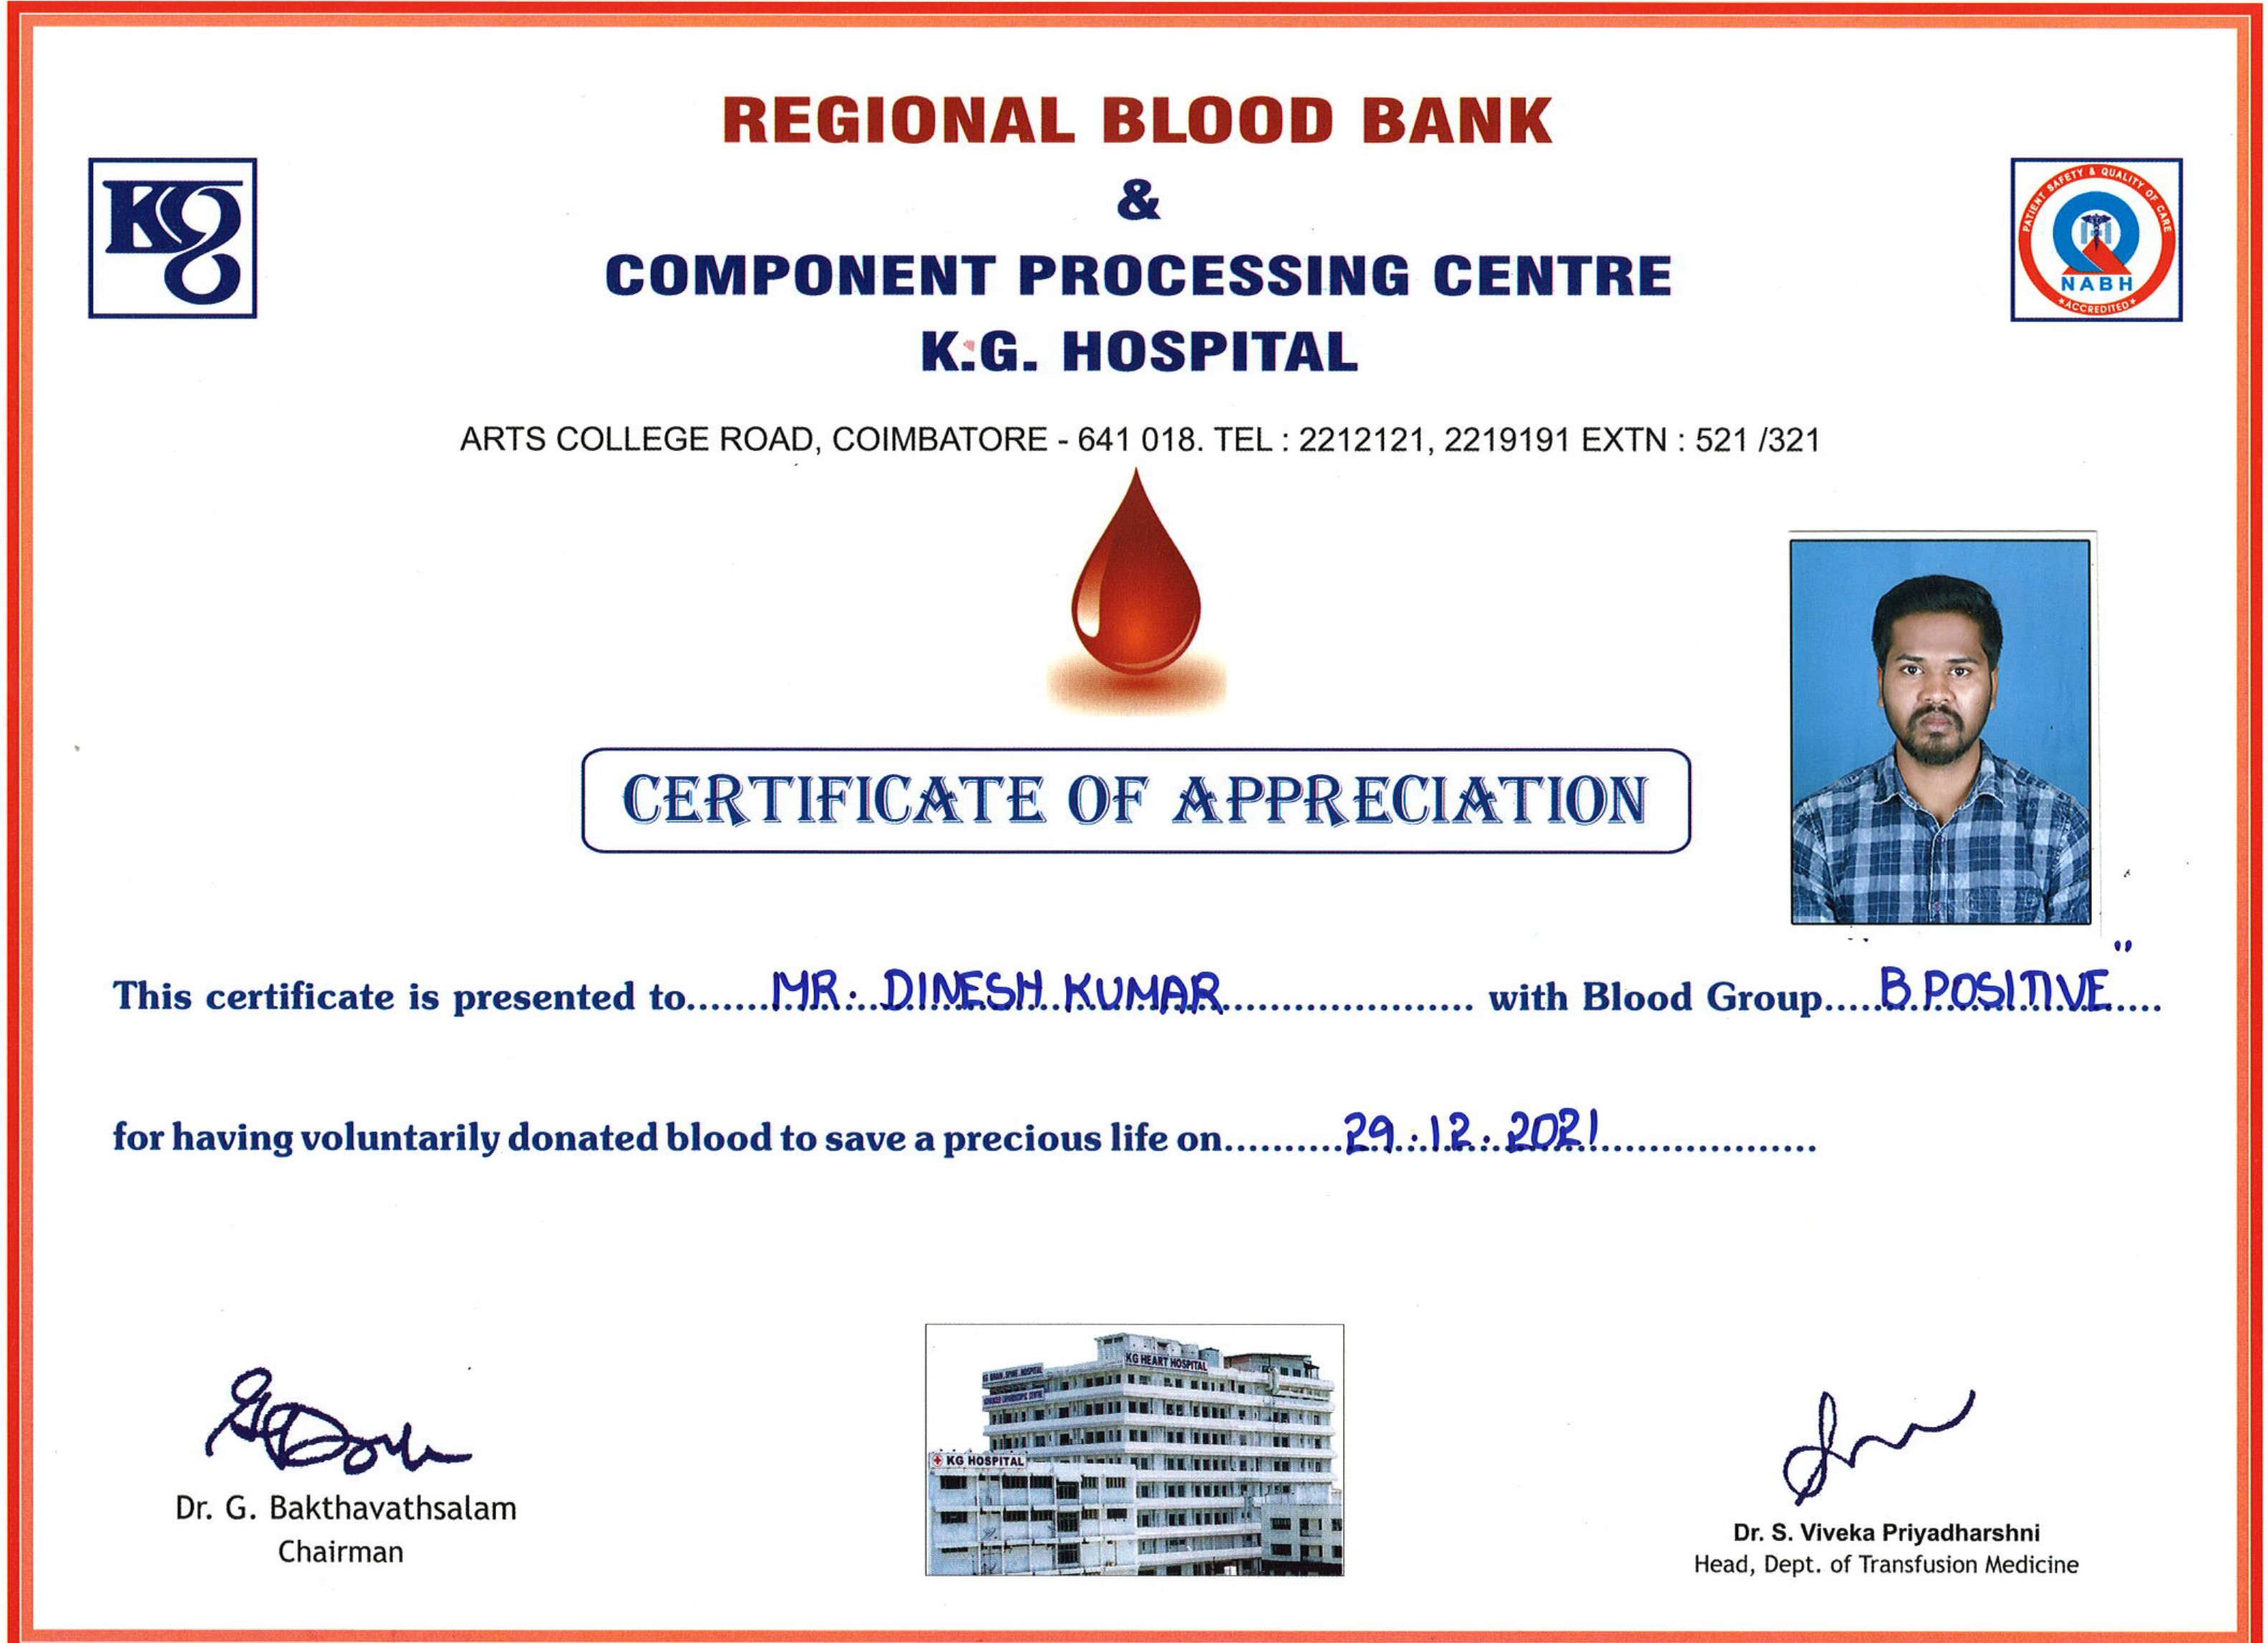 Blood donation by our SME employees